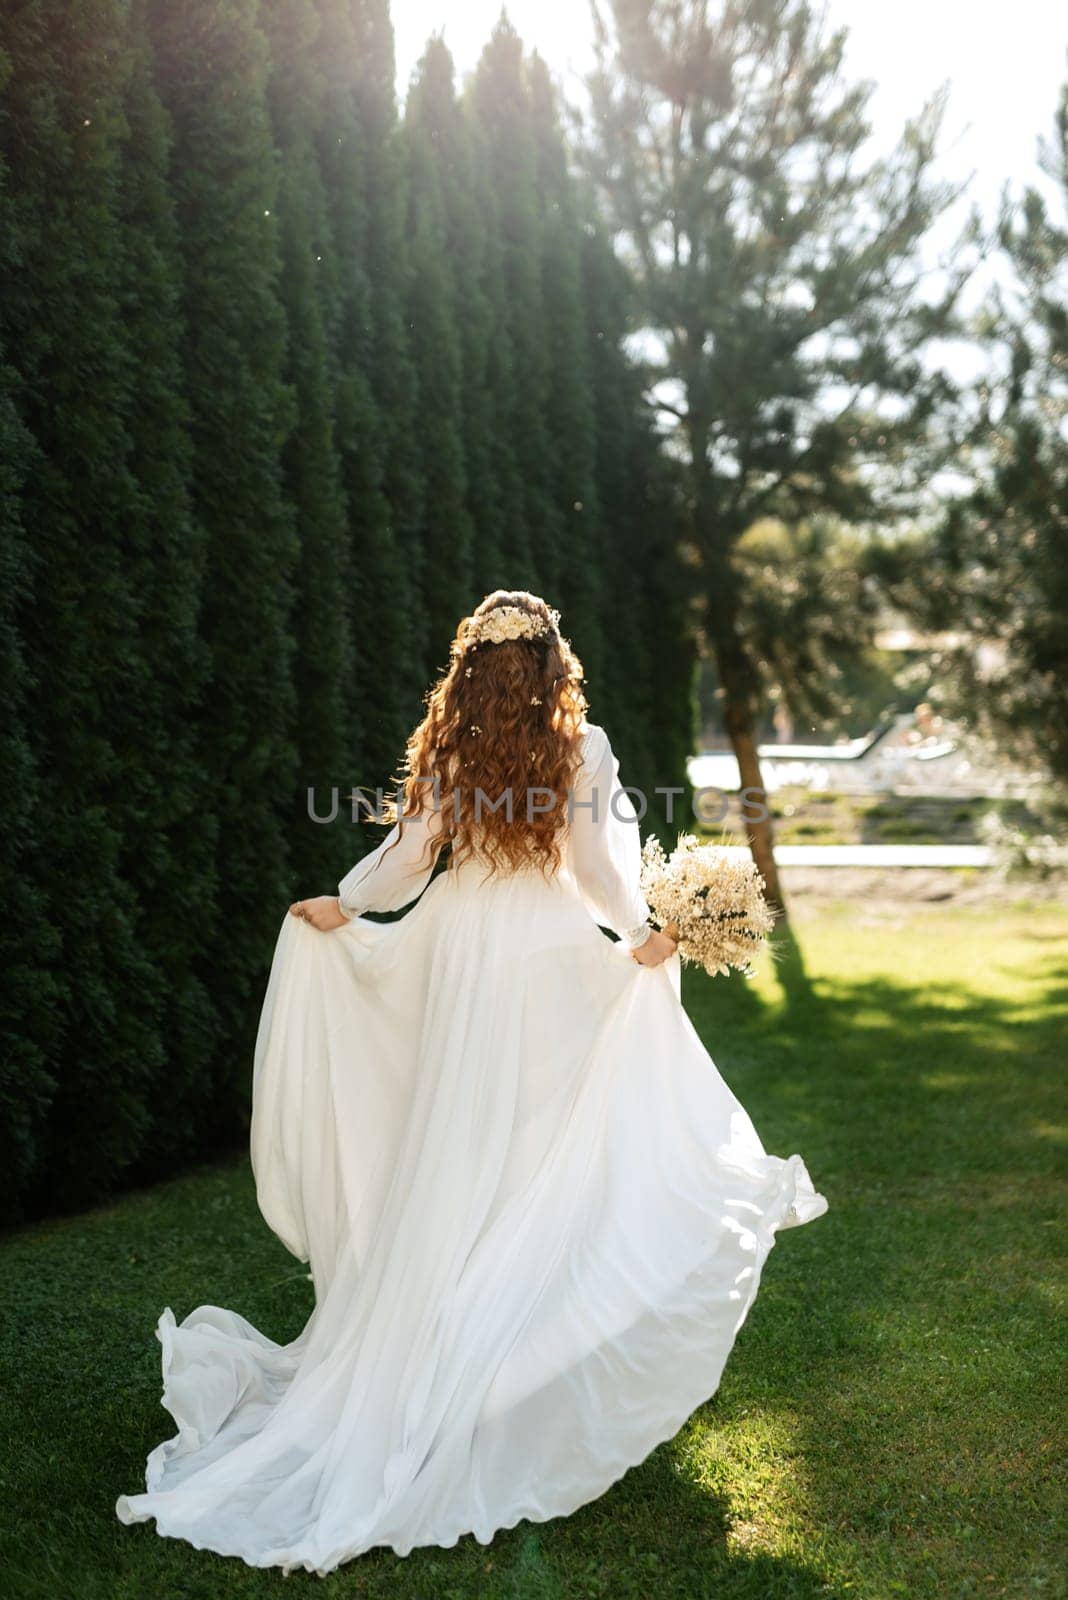 red-haired girl bride with a wedding bouquet by Andreua